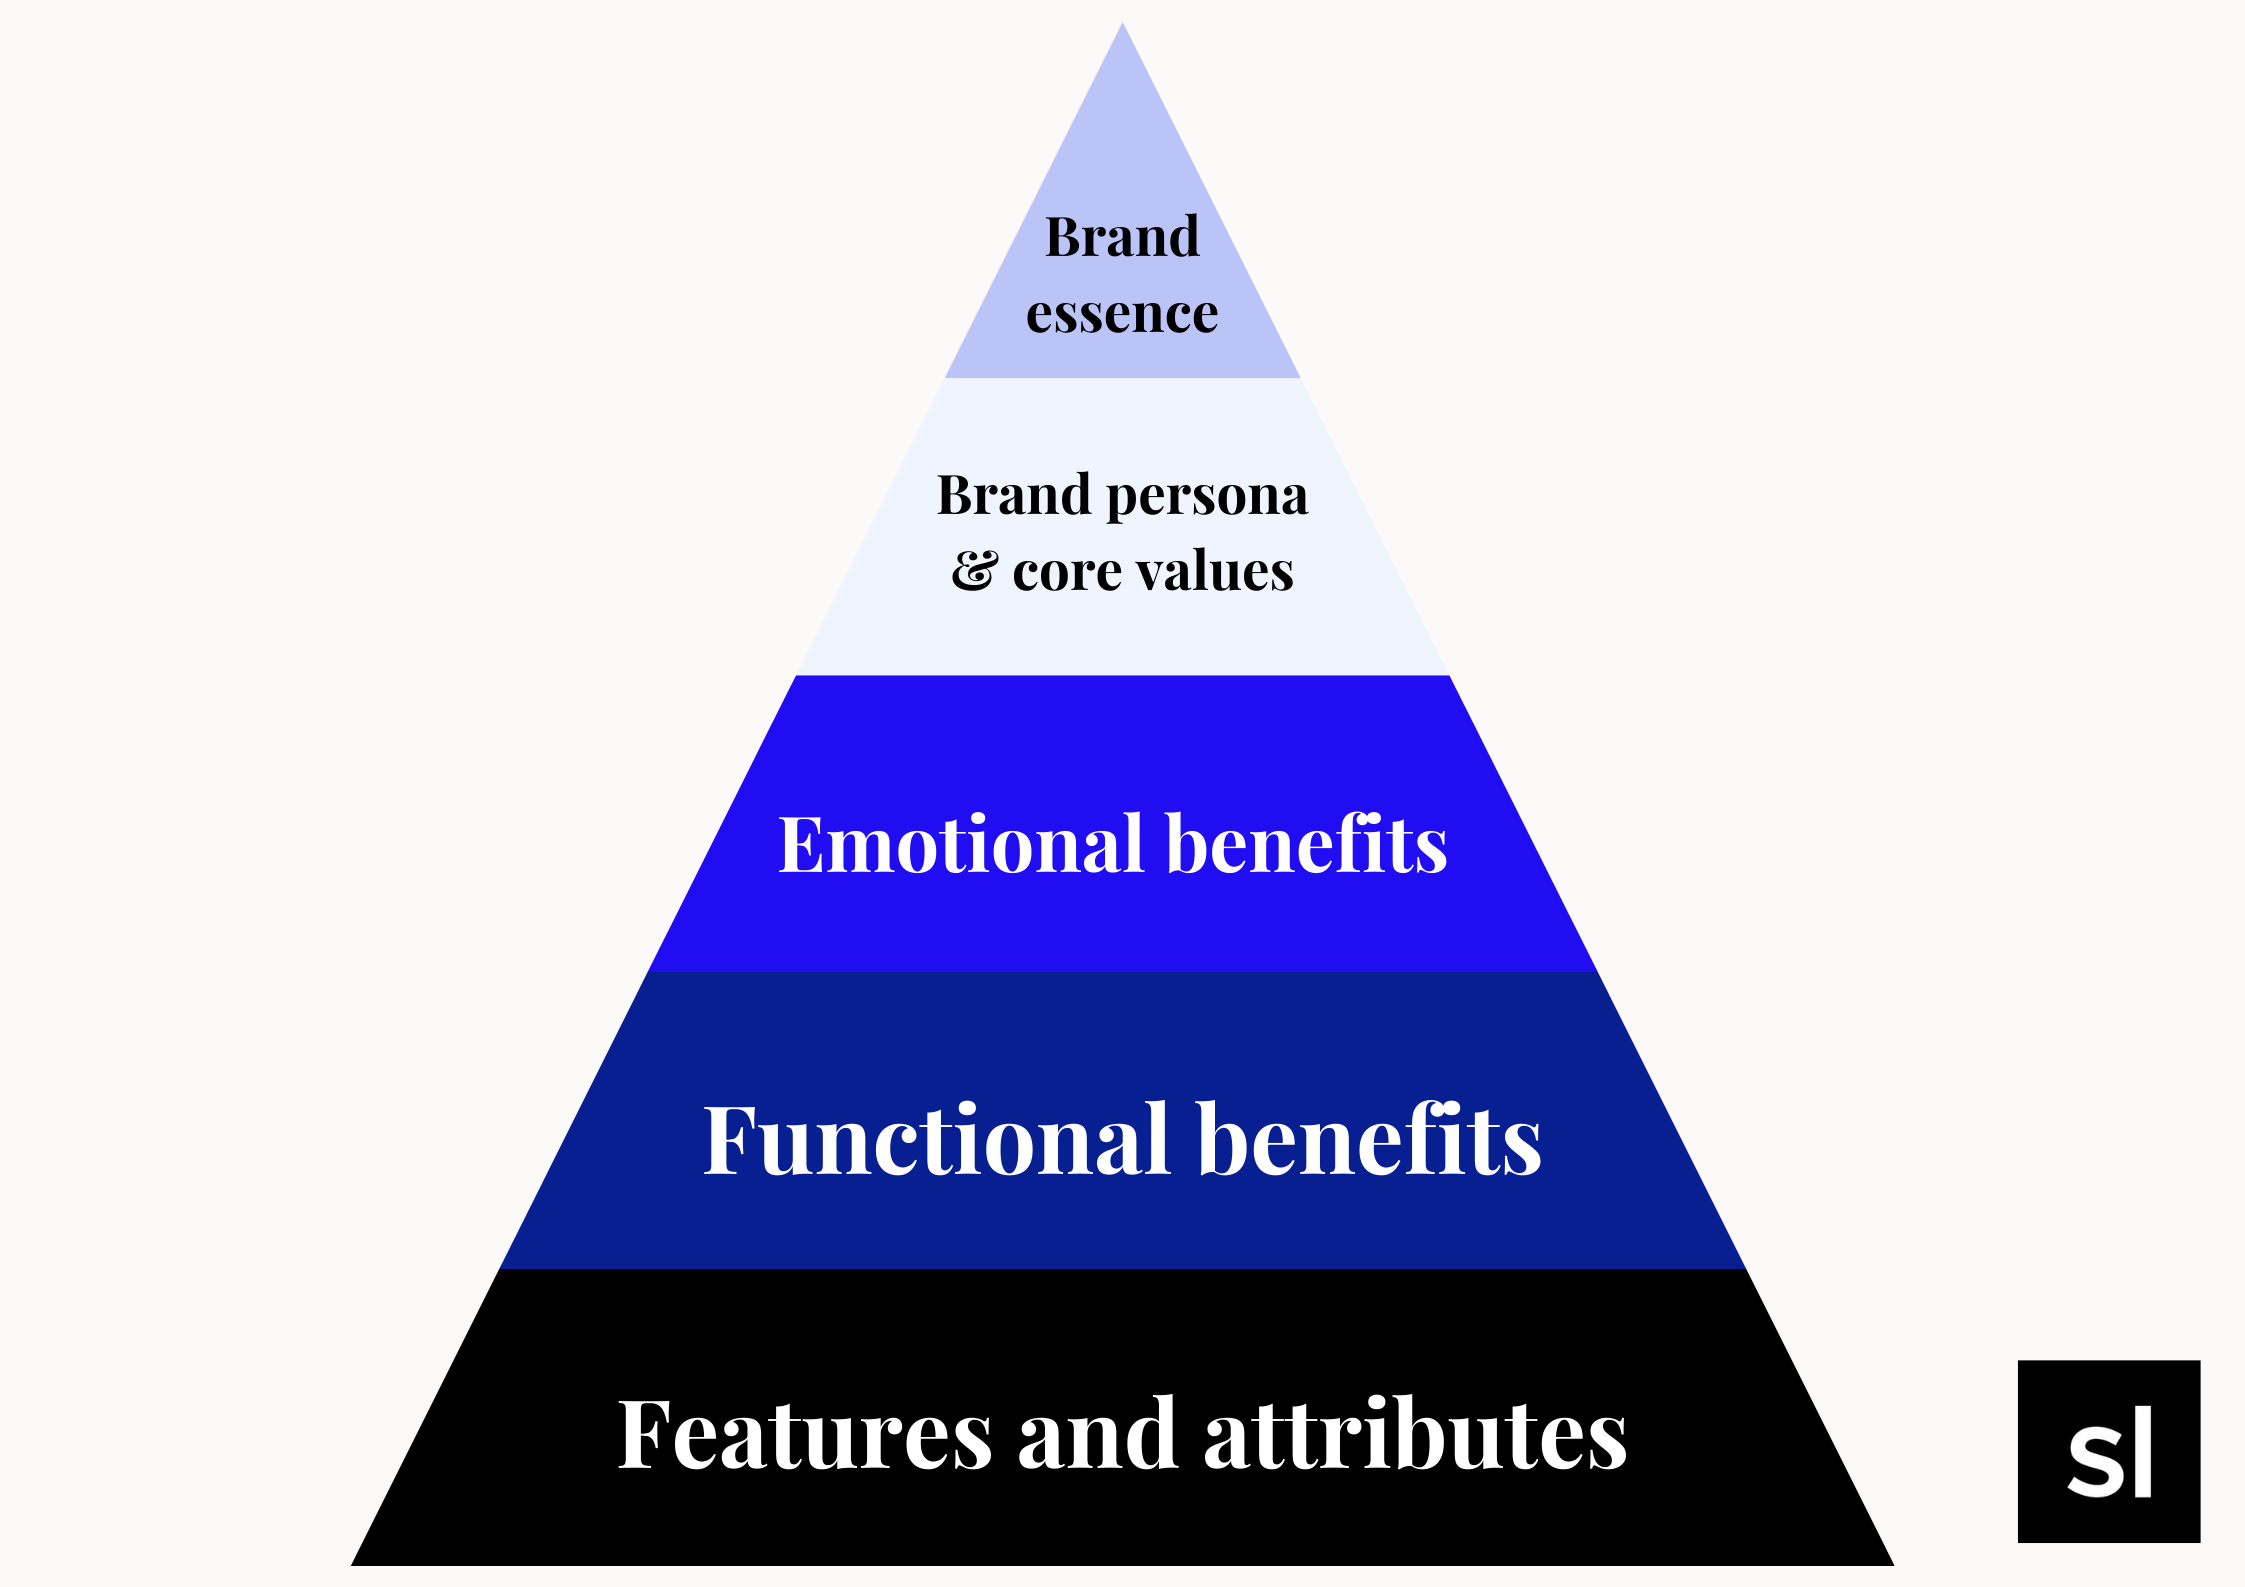 The brand pyramid model guides you from the most tangible aspects of the brand to its essence.